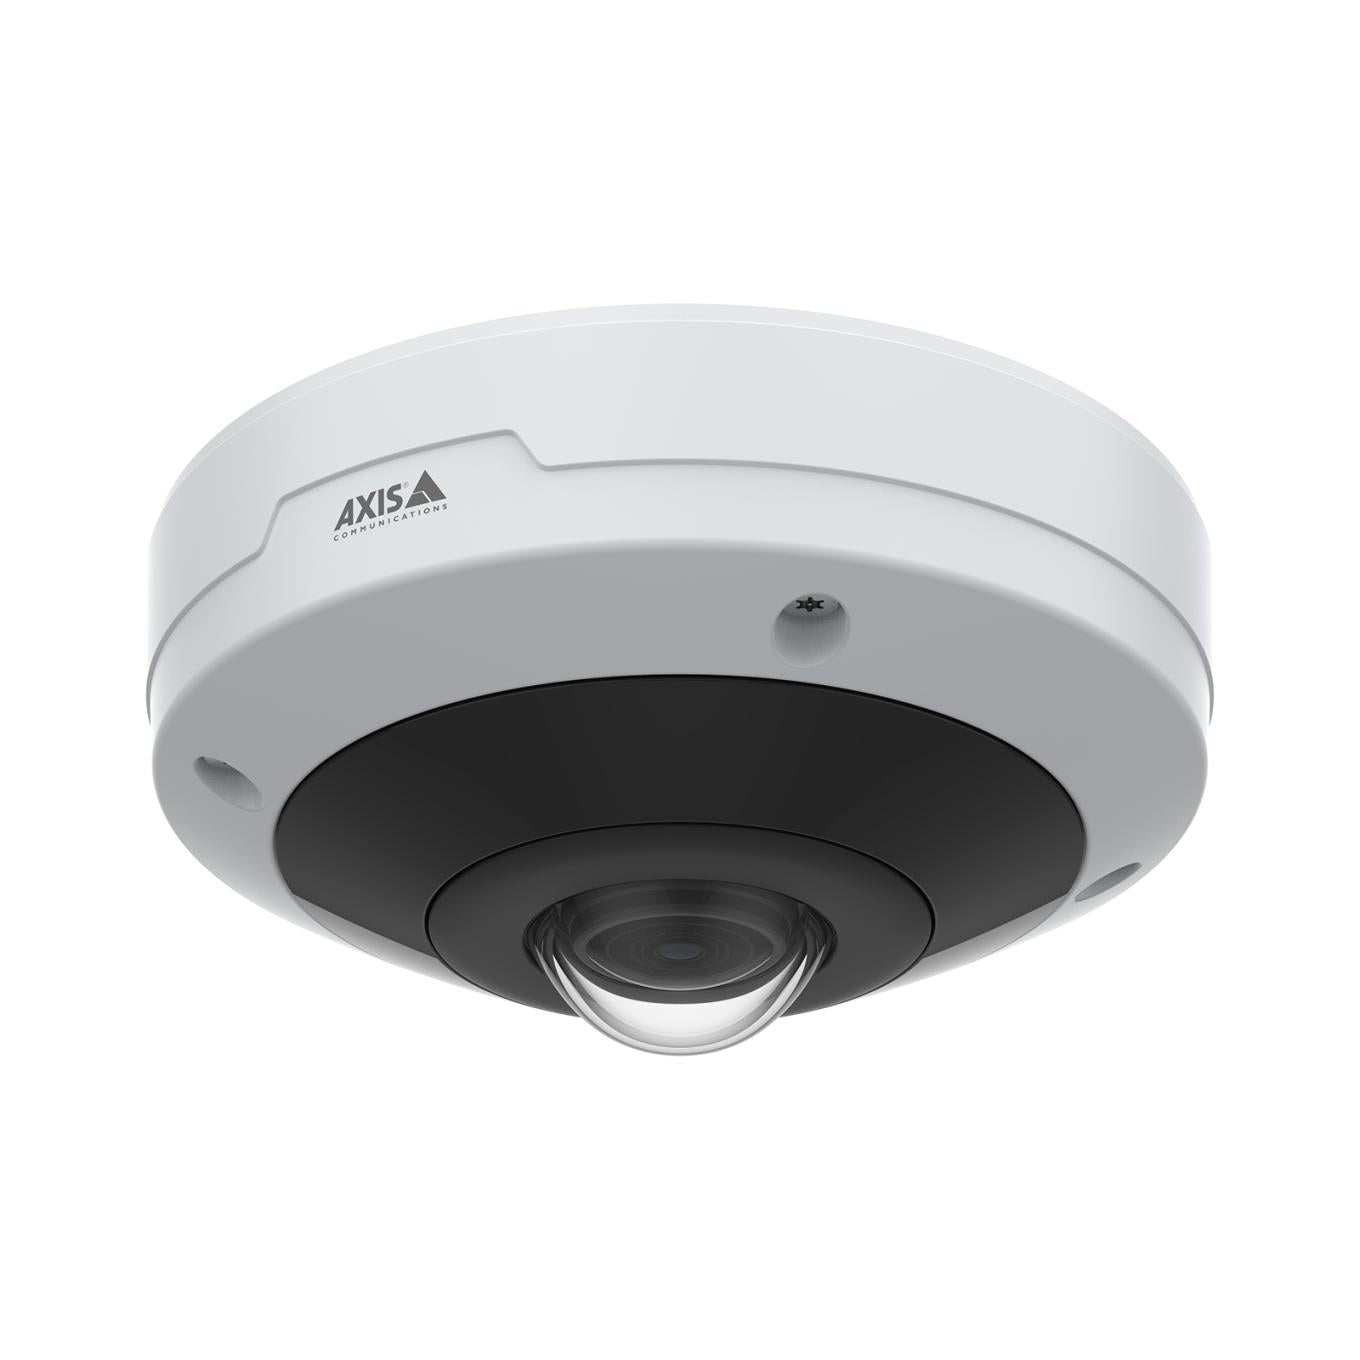 AXIS M4318-PLVE 12MP Dome Camera, IR, PoE, 180/360 Fixed Lens